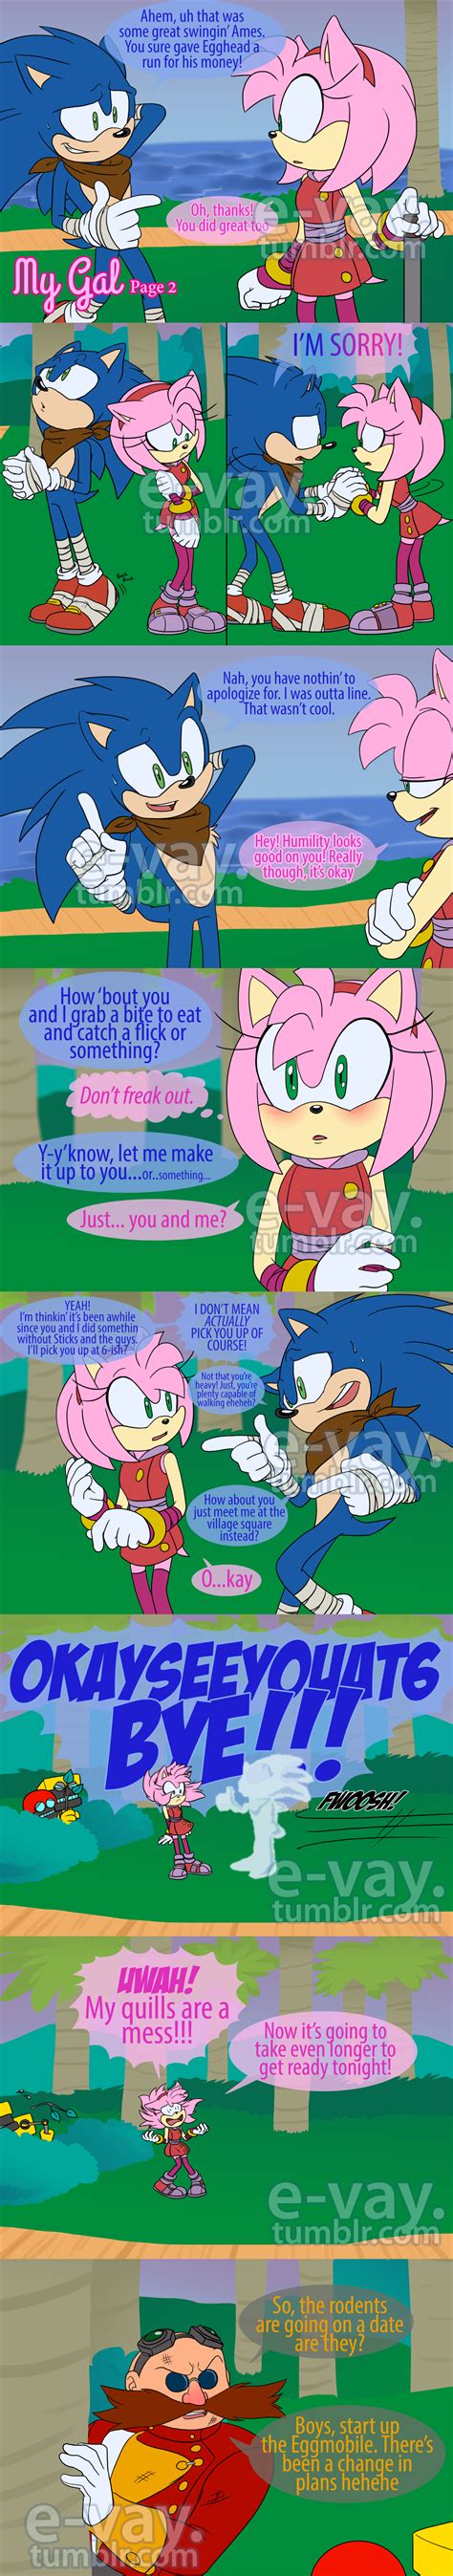 My Gal Part 2 By E Vay Sonic Heroes Sonic Boom Sonic Amy